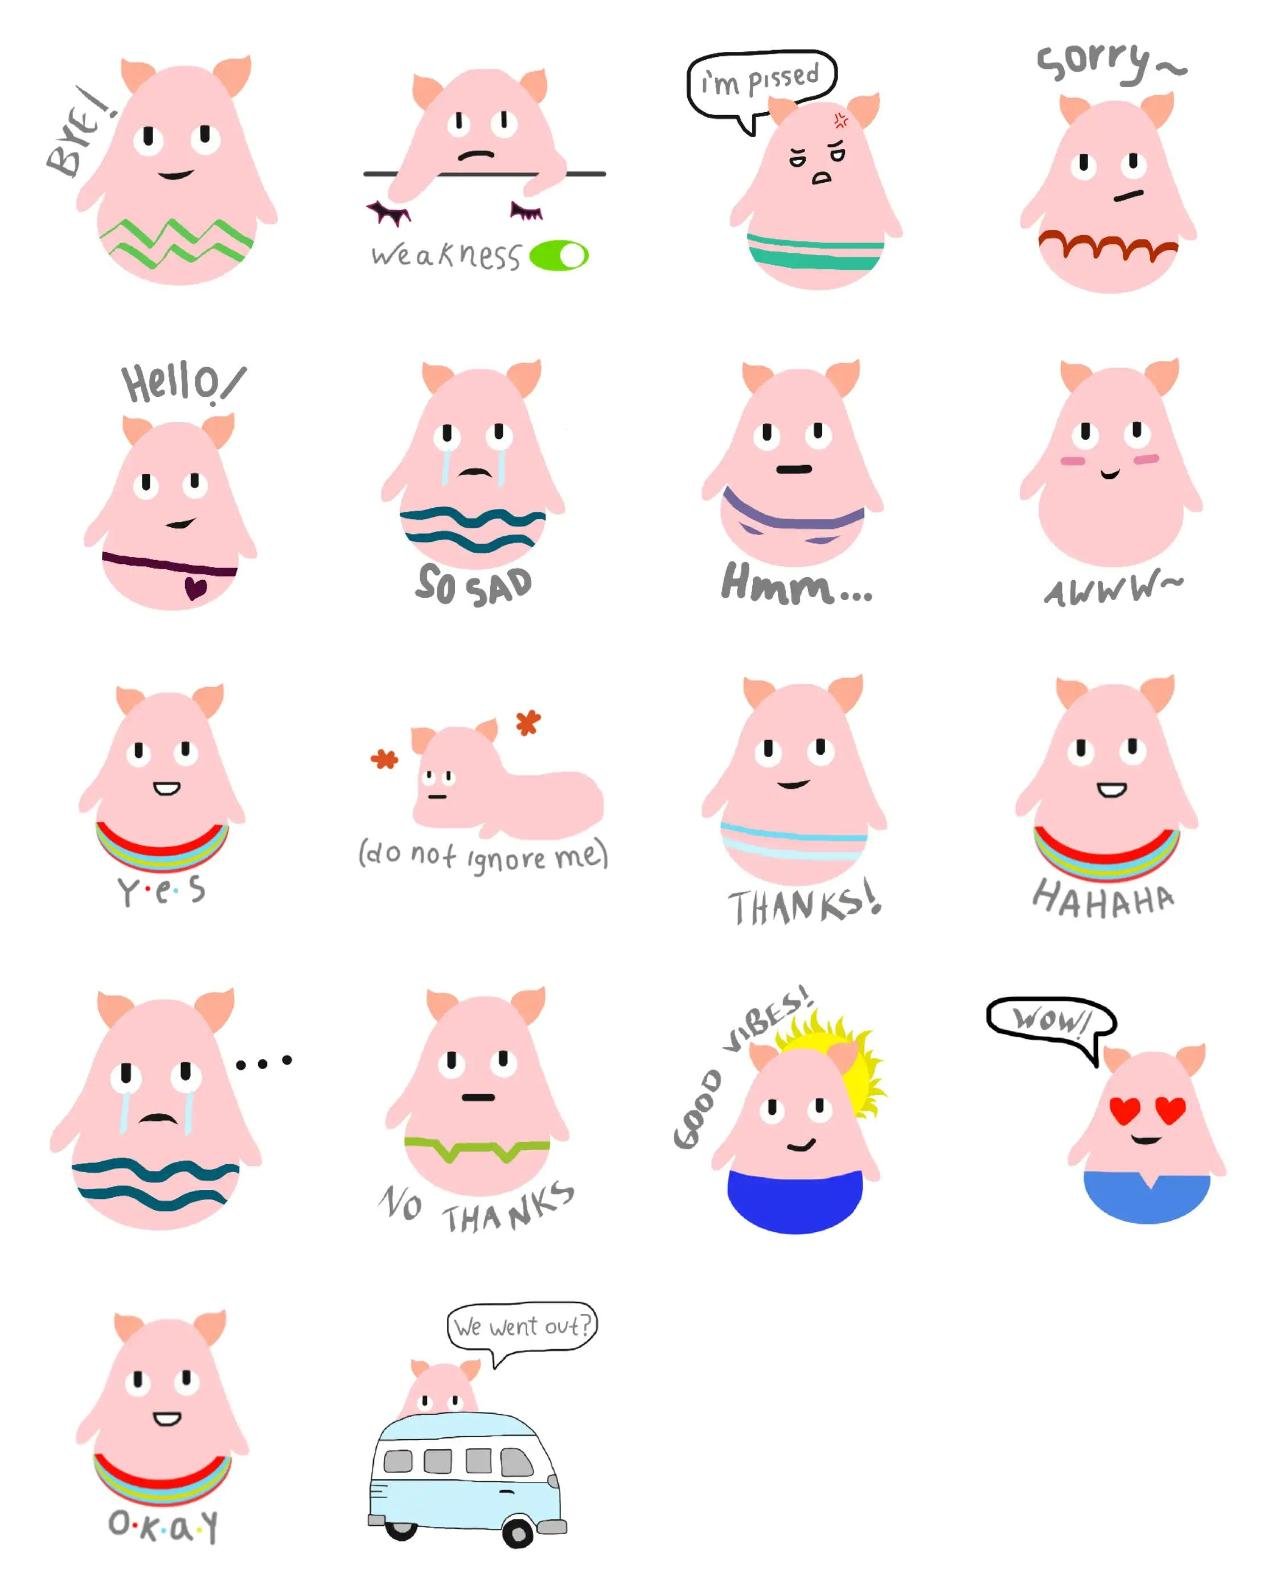 spongy linlin Animation/Cartoon,Phrases sticker pack for Whatsapp, Telegram, Signal, and others chatting and message apps